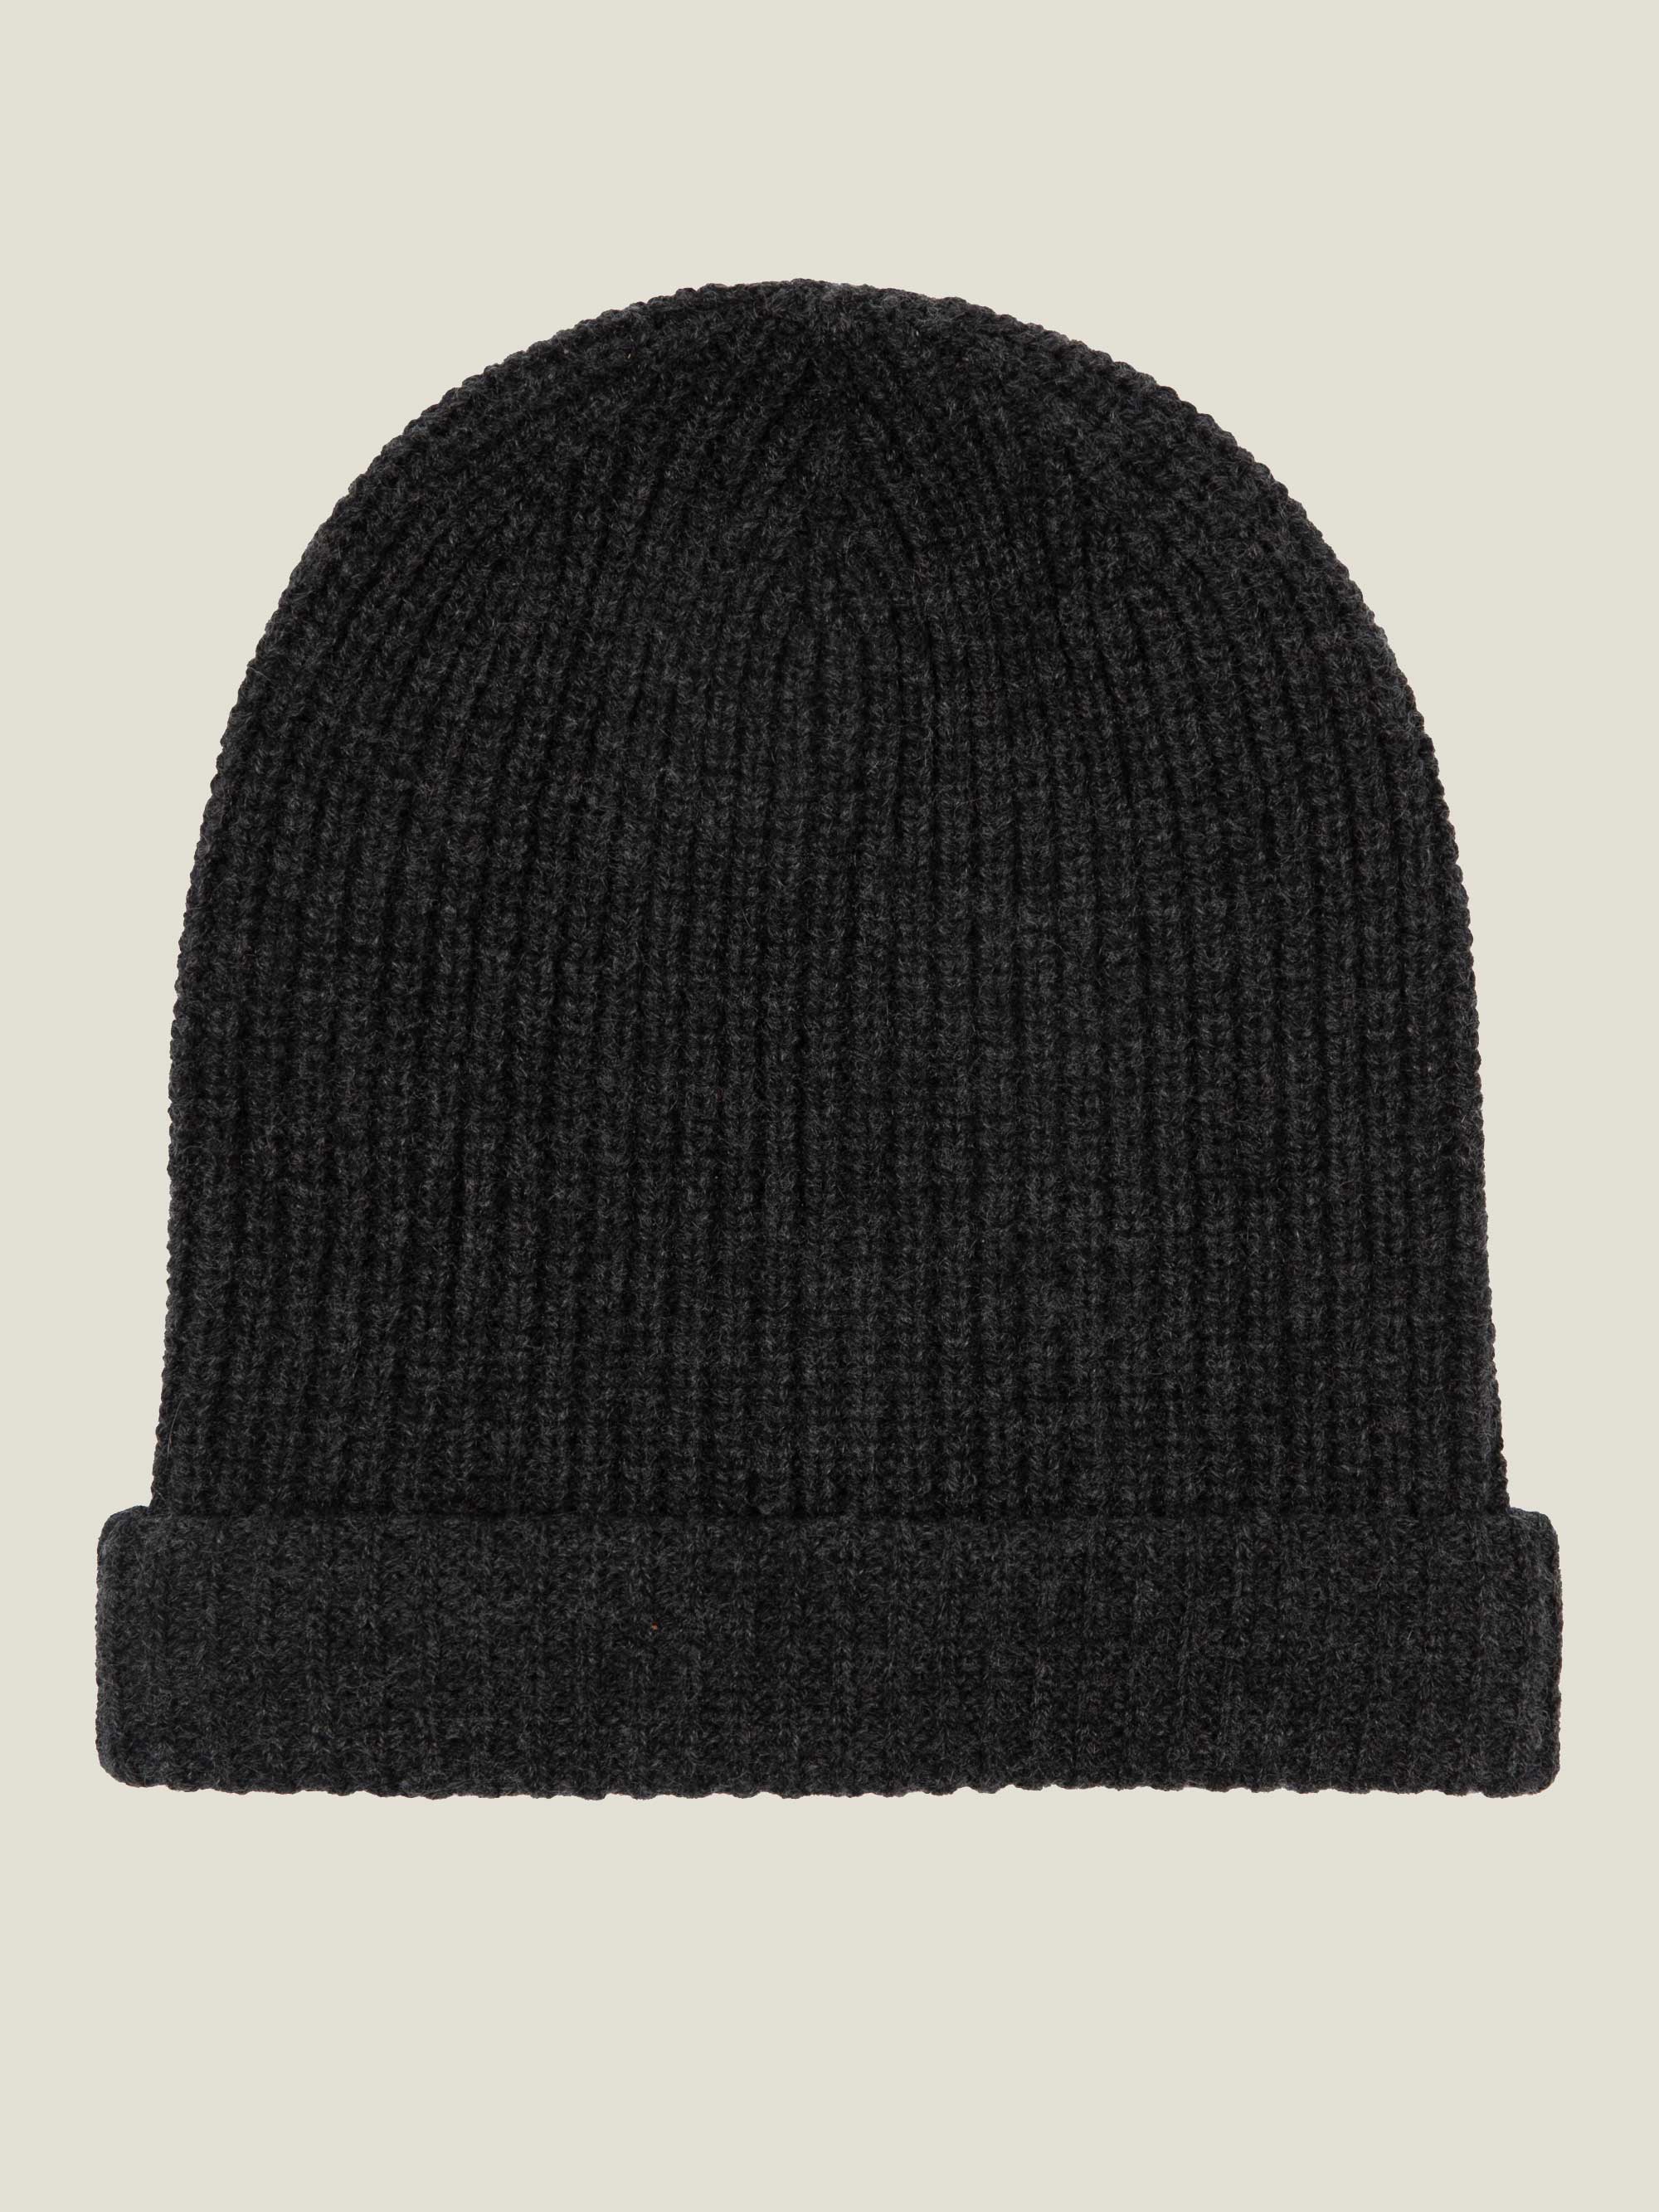 Charcoal Grey Chunky Knit Cashmere Beanie product